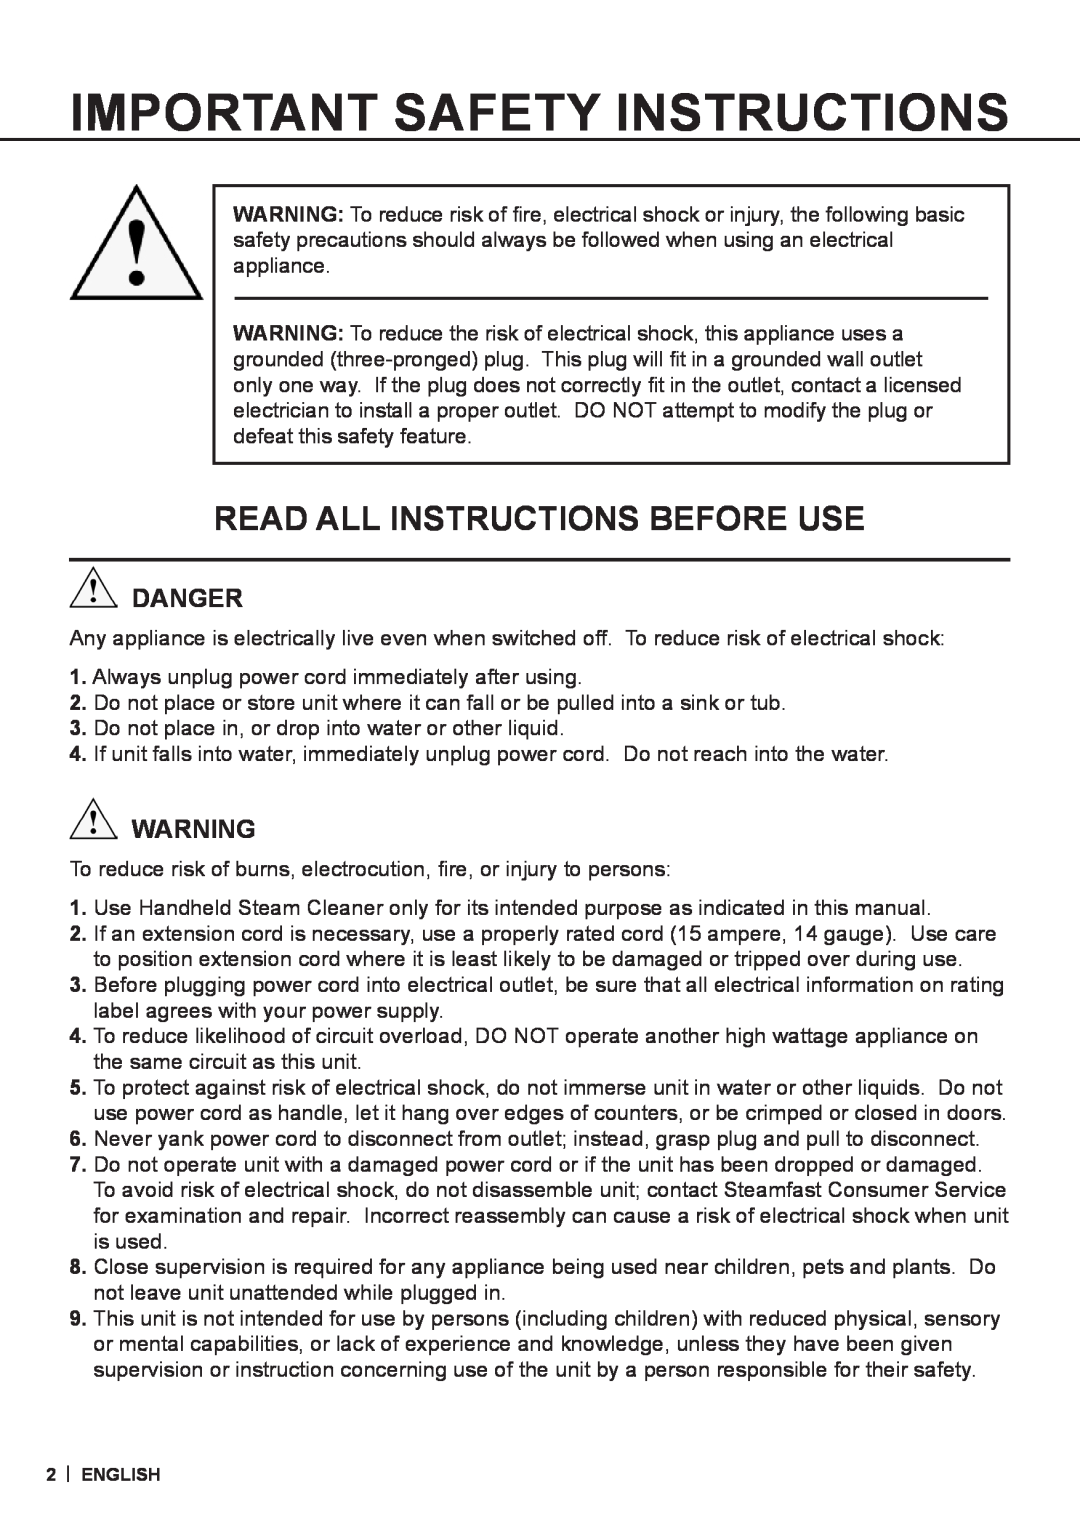 McCulloch MC1226 warranty Important Safety Instructions, Danger, Read All Instructions Before Use 